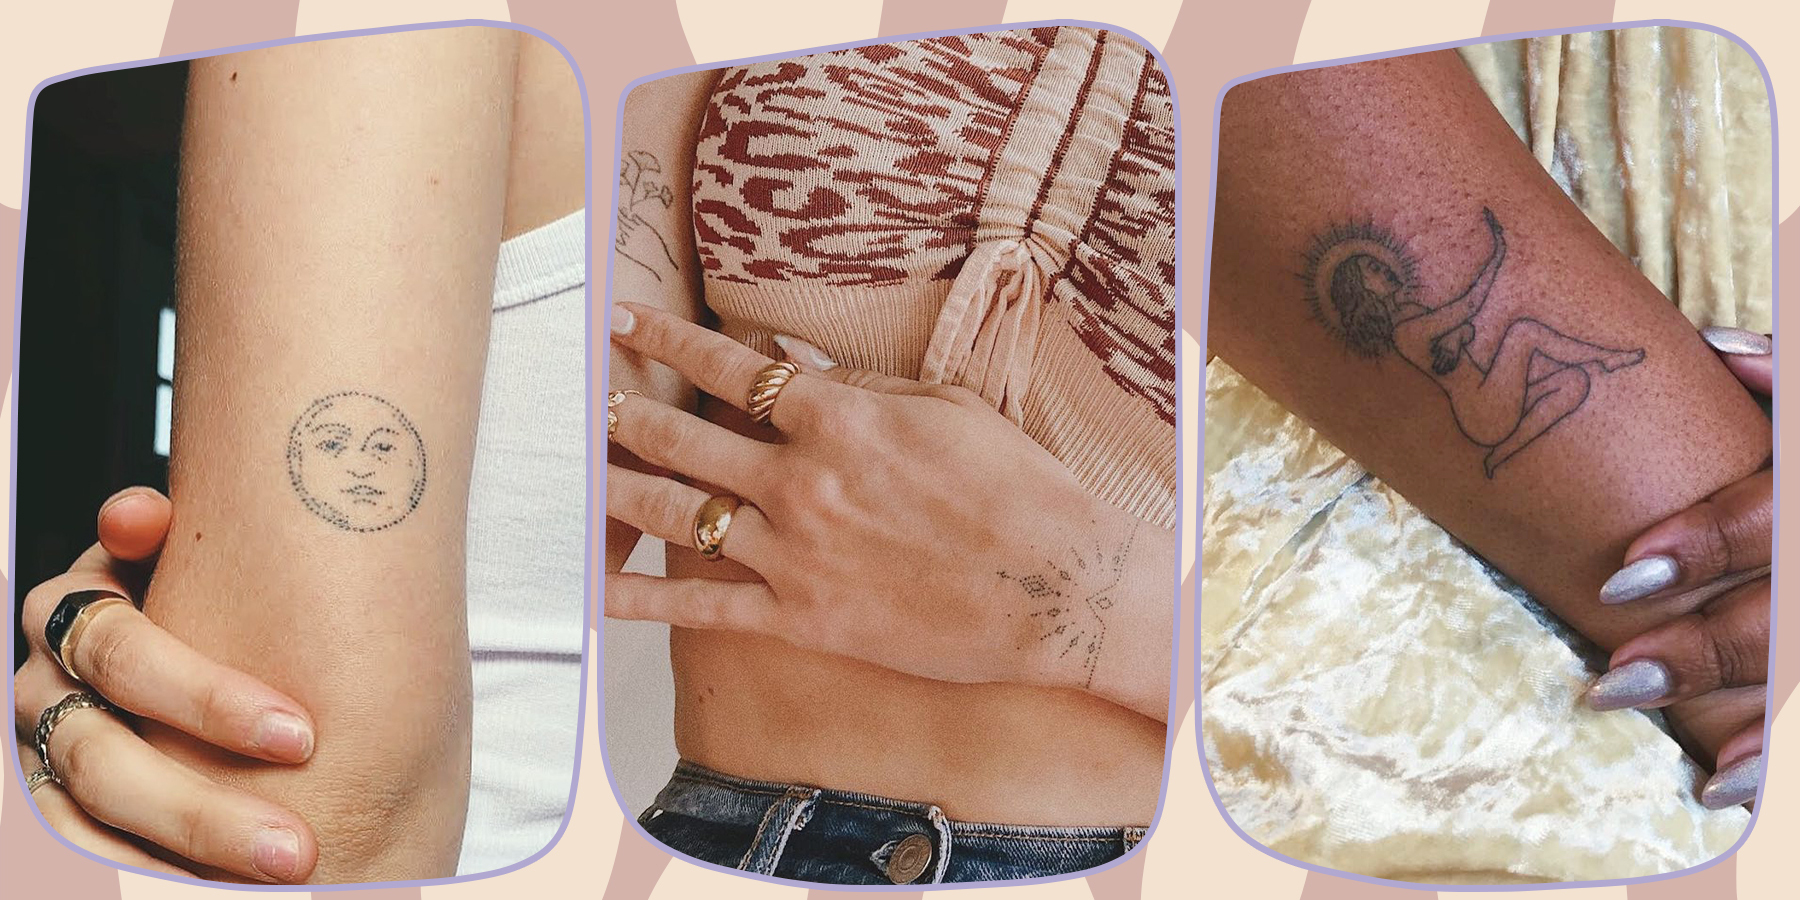 Stick-and-Poke Tattoos Are Everywhere— Here's What You Need to KnowHelloGiggles